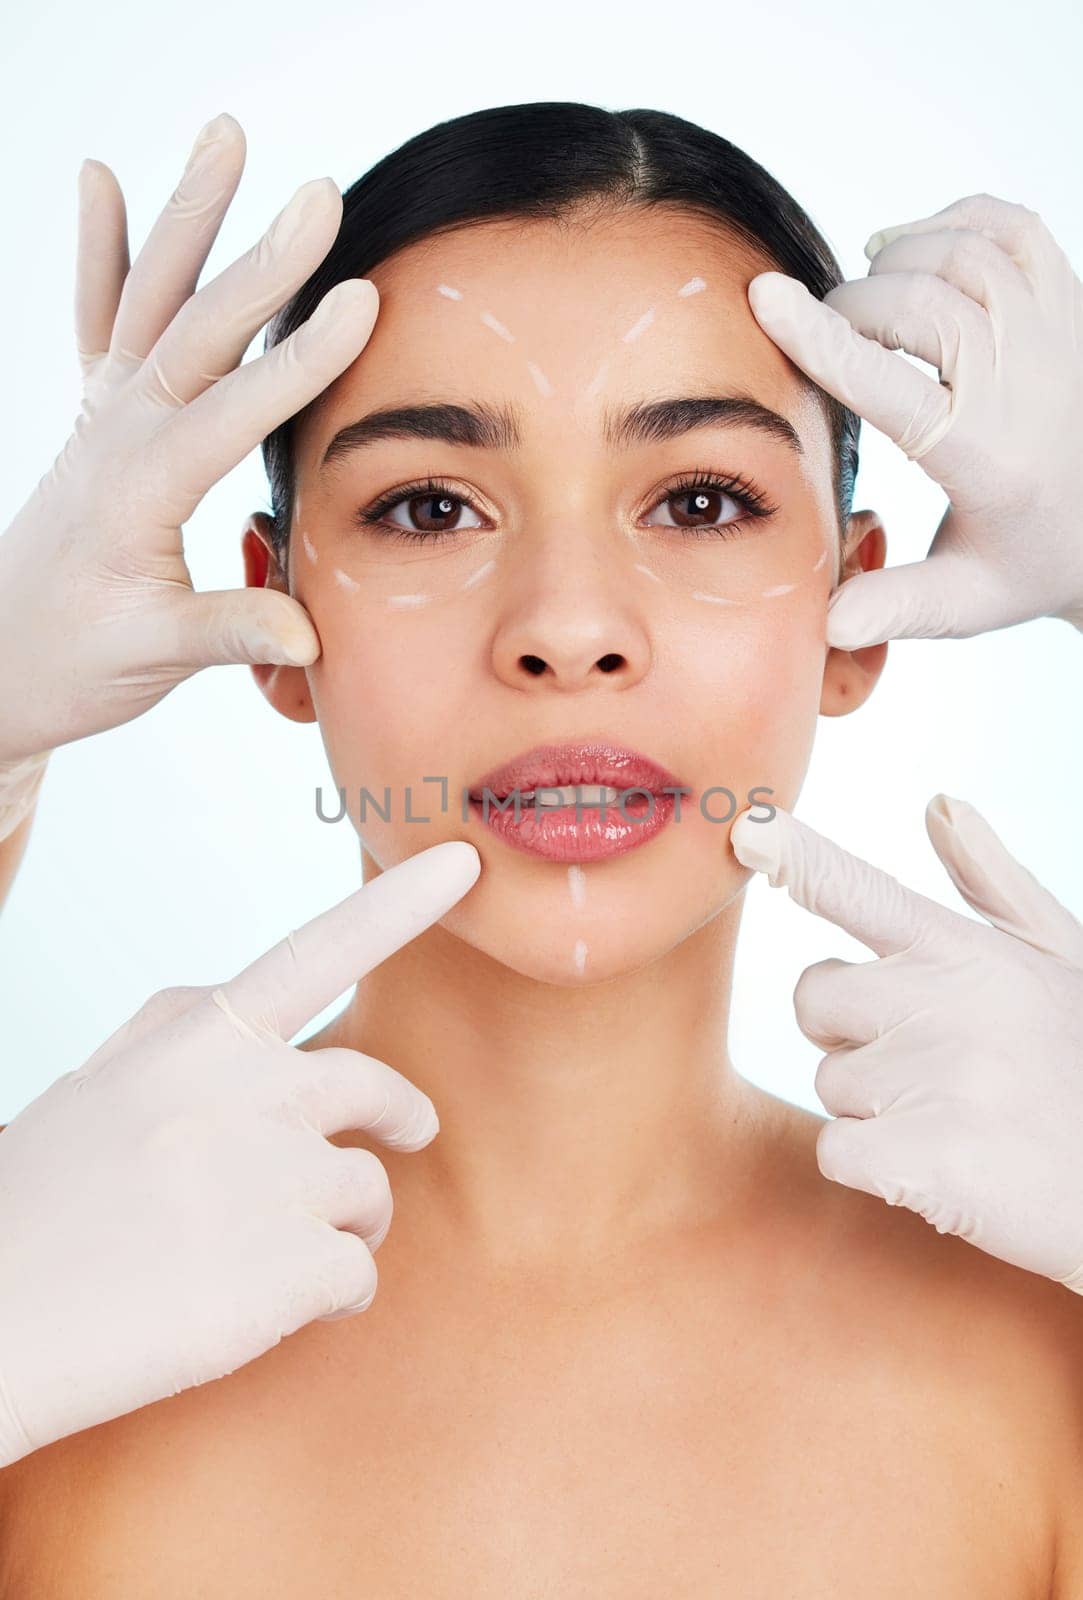 Making sure the measurements are perfect. Studio portrait of an attractive young woman having some plastic surgery done against a light background